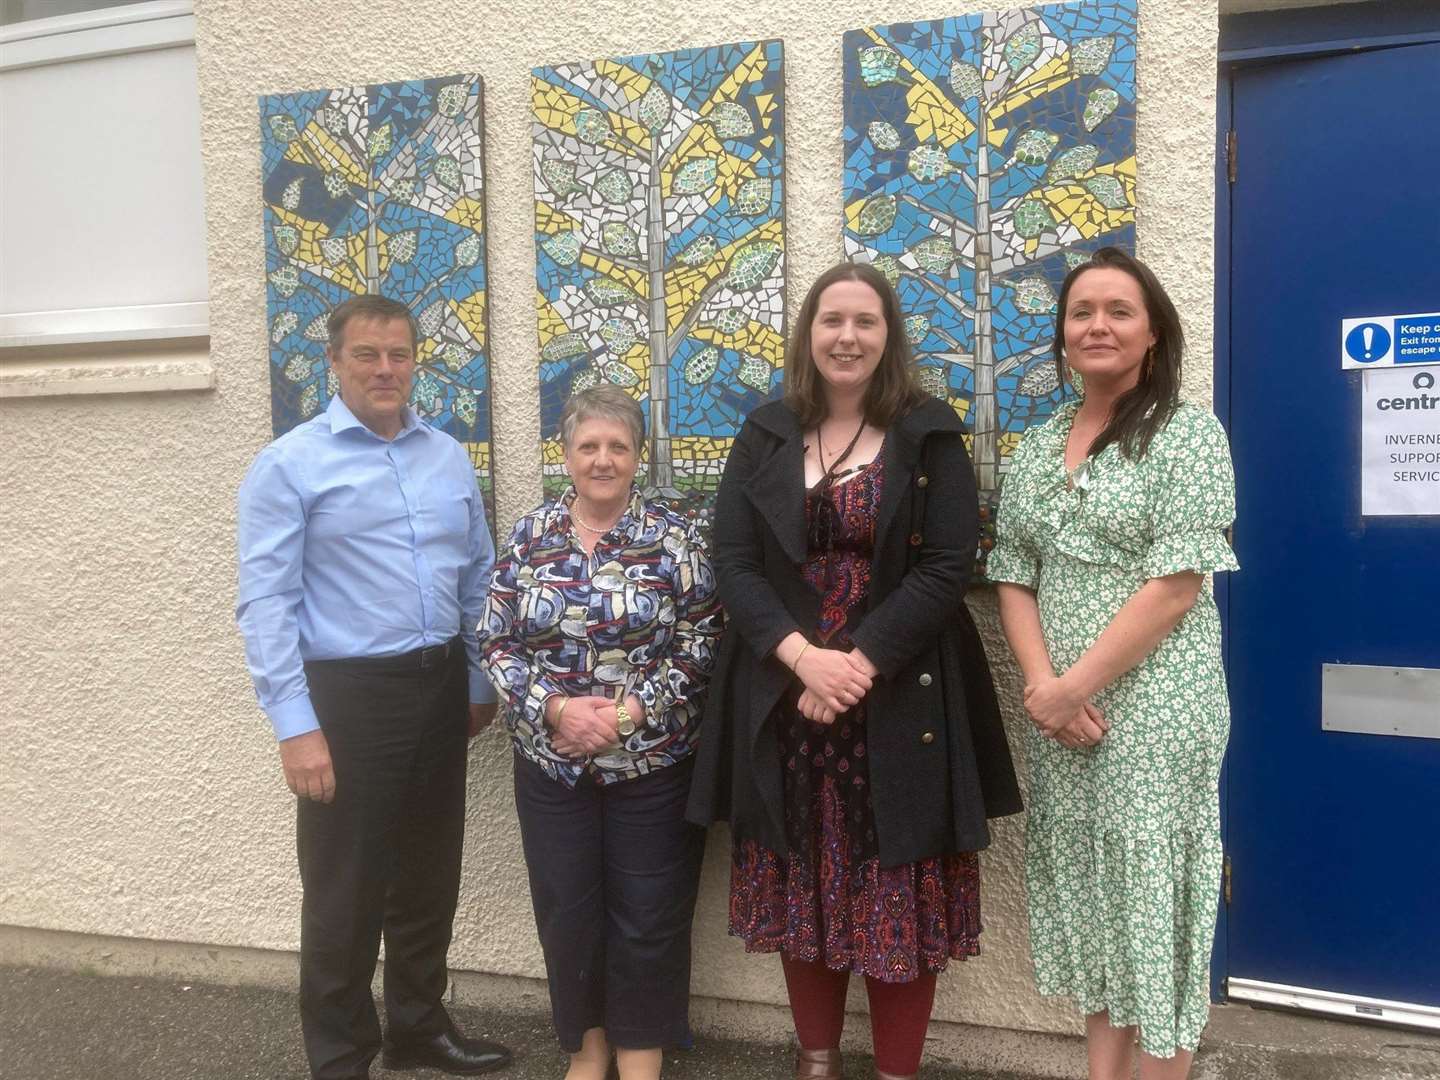 From left: David Brookfield (Centred chief executive), Annabel Mowat (Centred depute chief executive), Emma Roddick (MSP) and Dr Clare Daly (Centred head of communications and research).